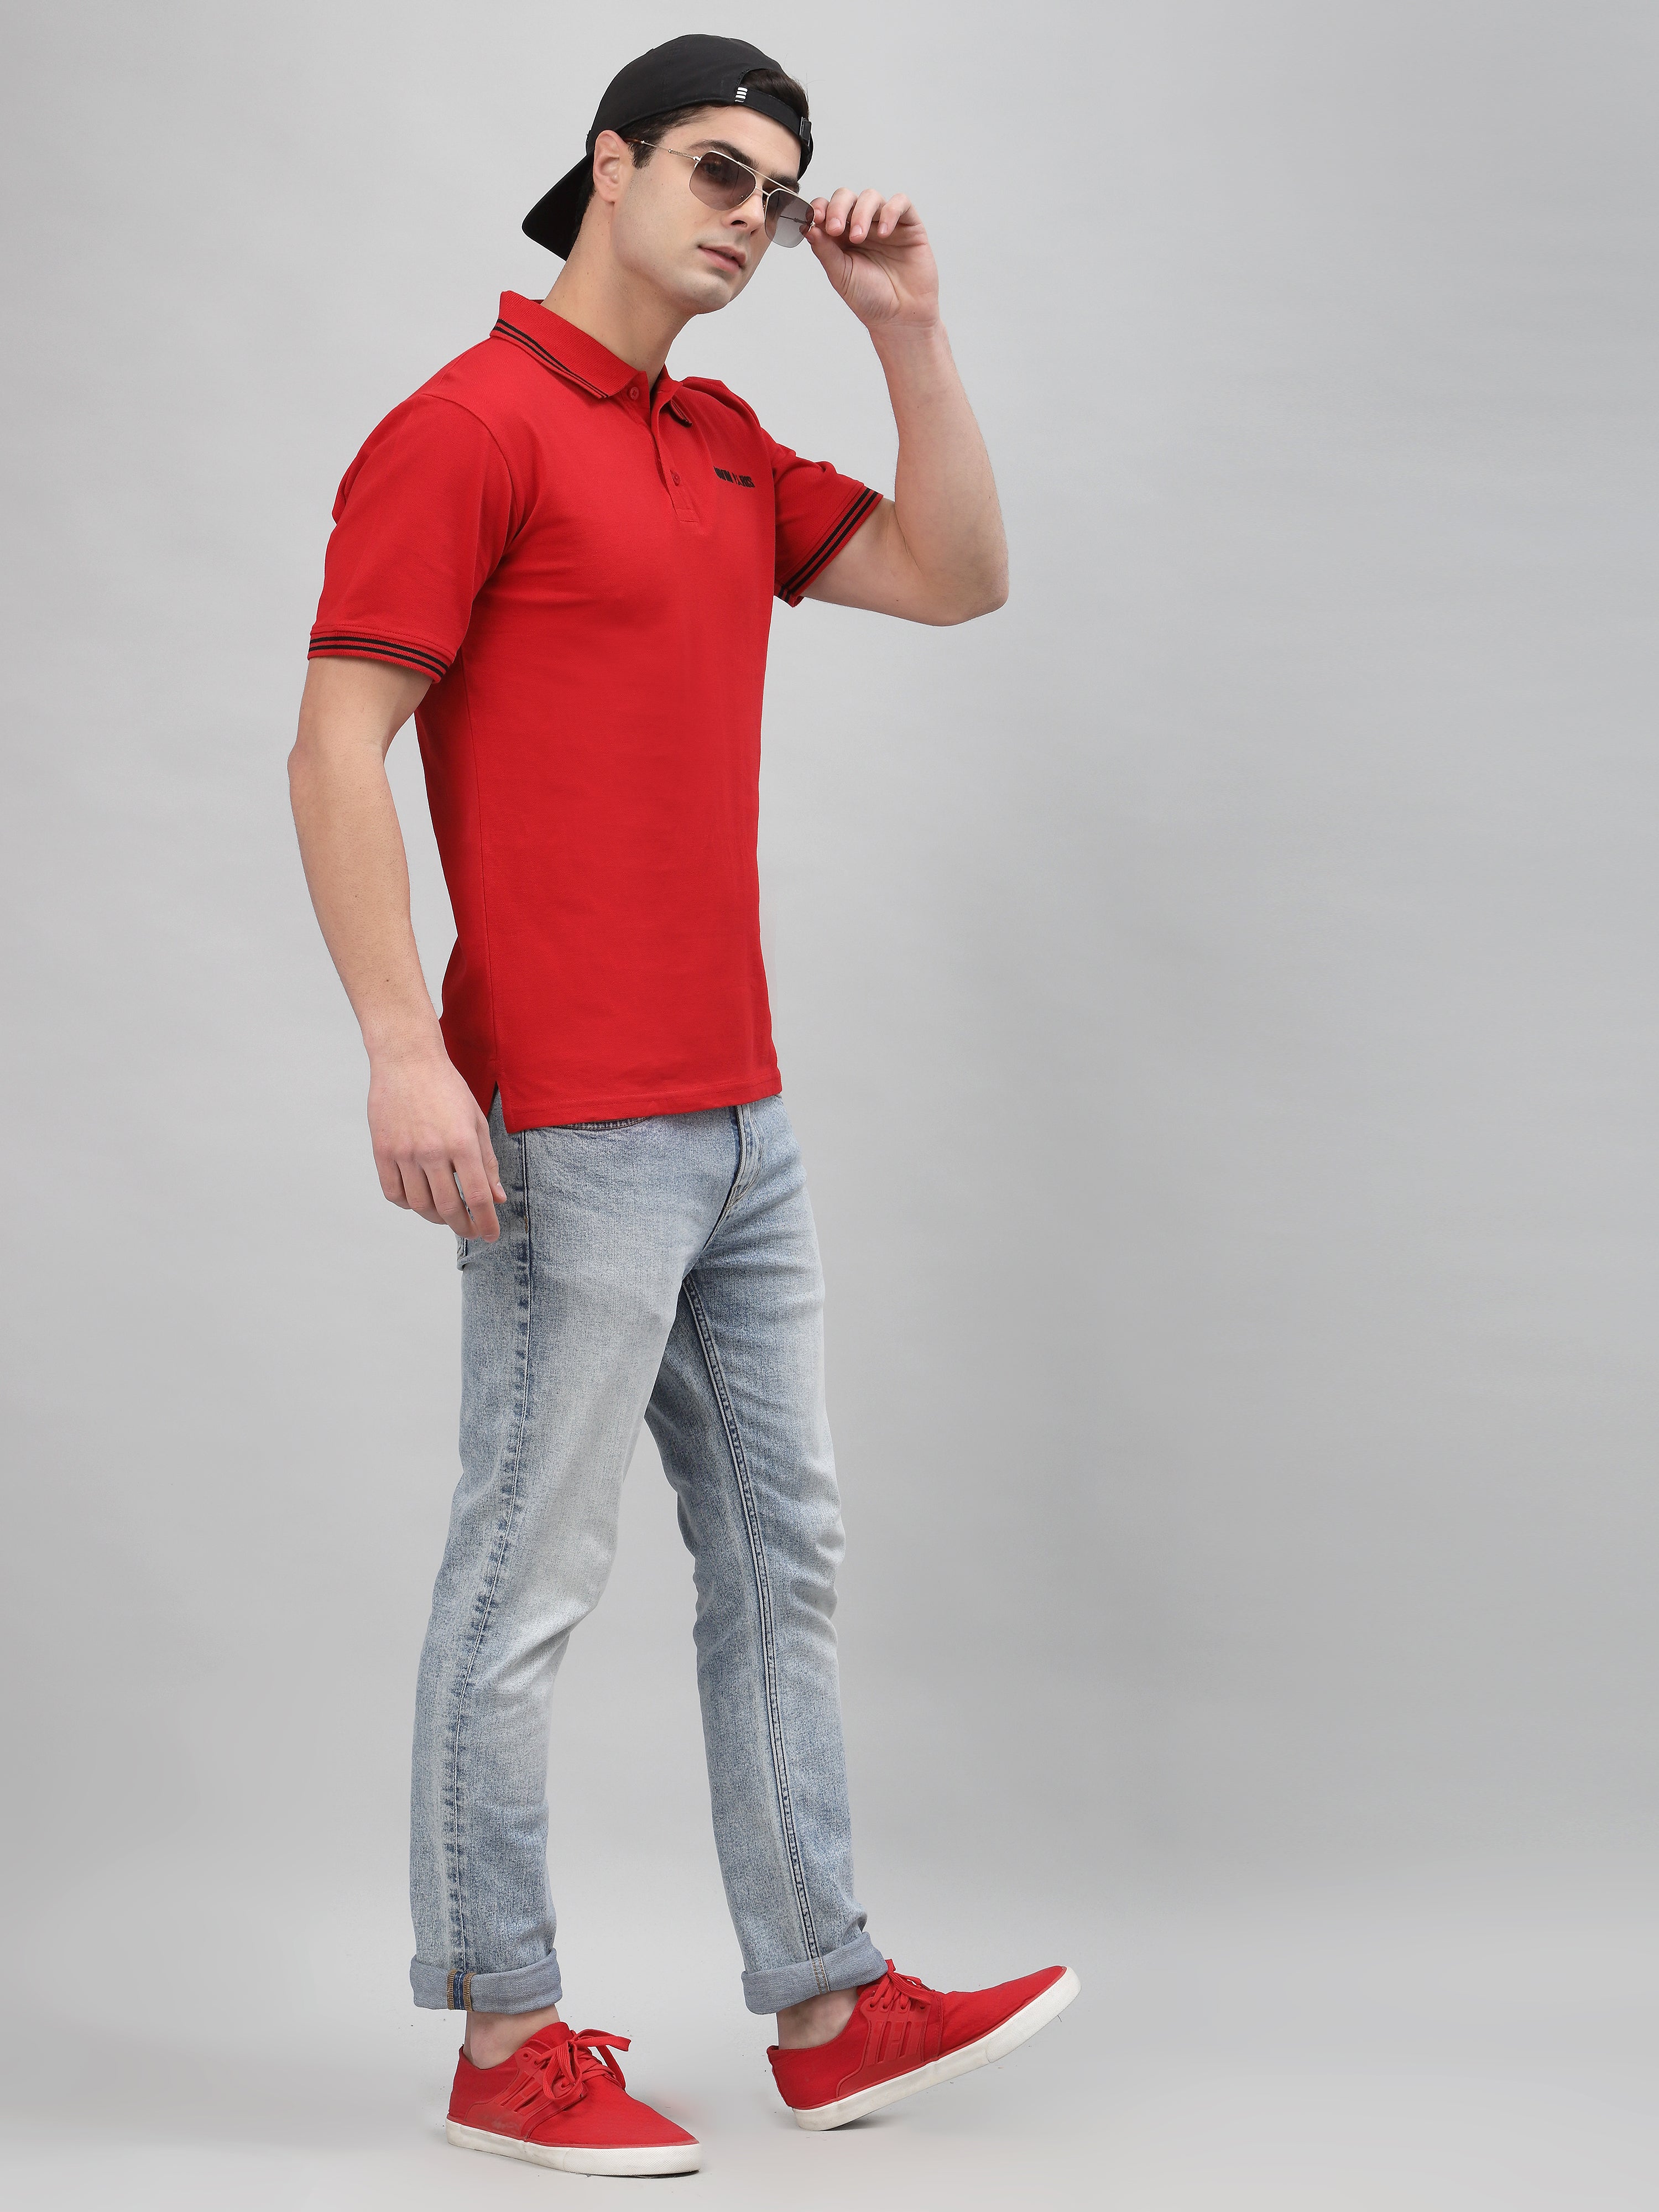 Red Embroidered Pique Polo Shirt by Gavin Paris